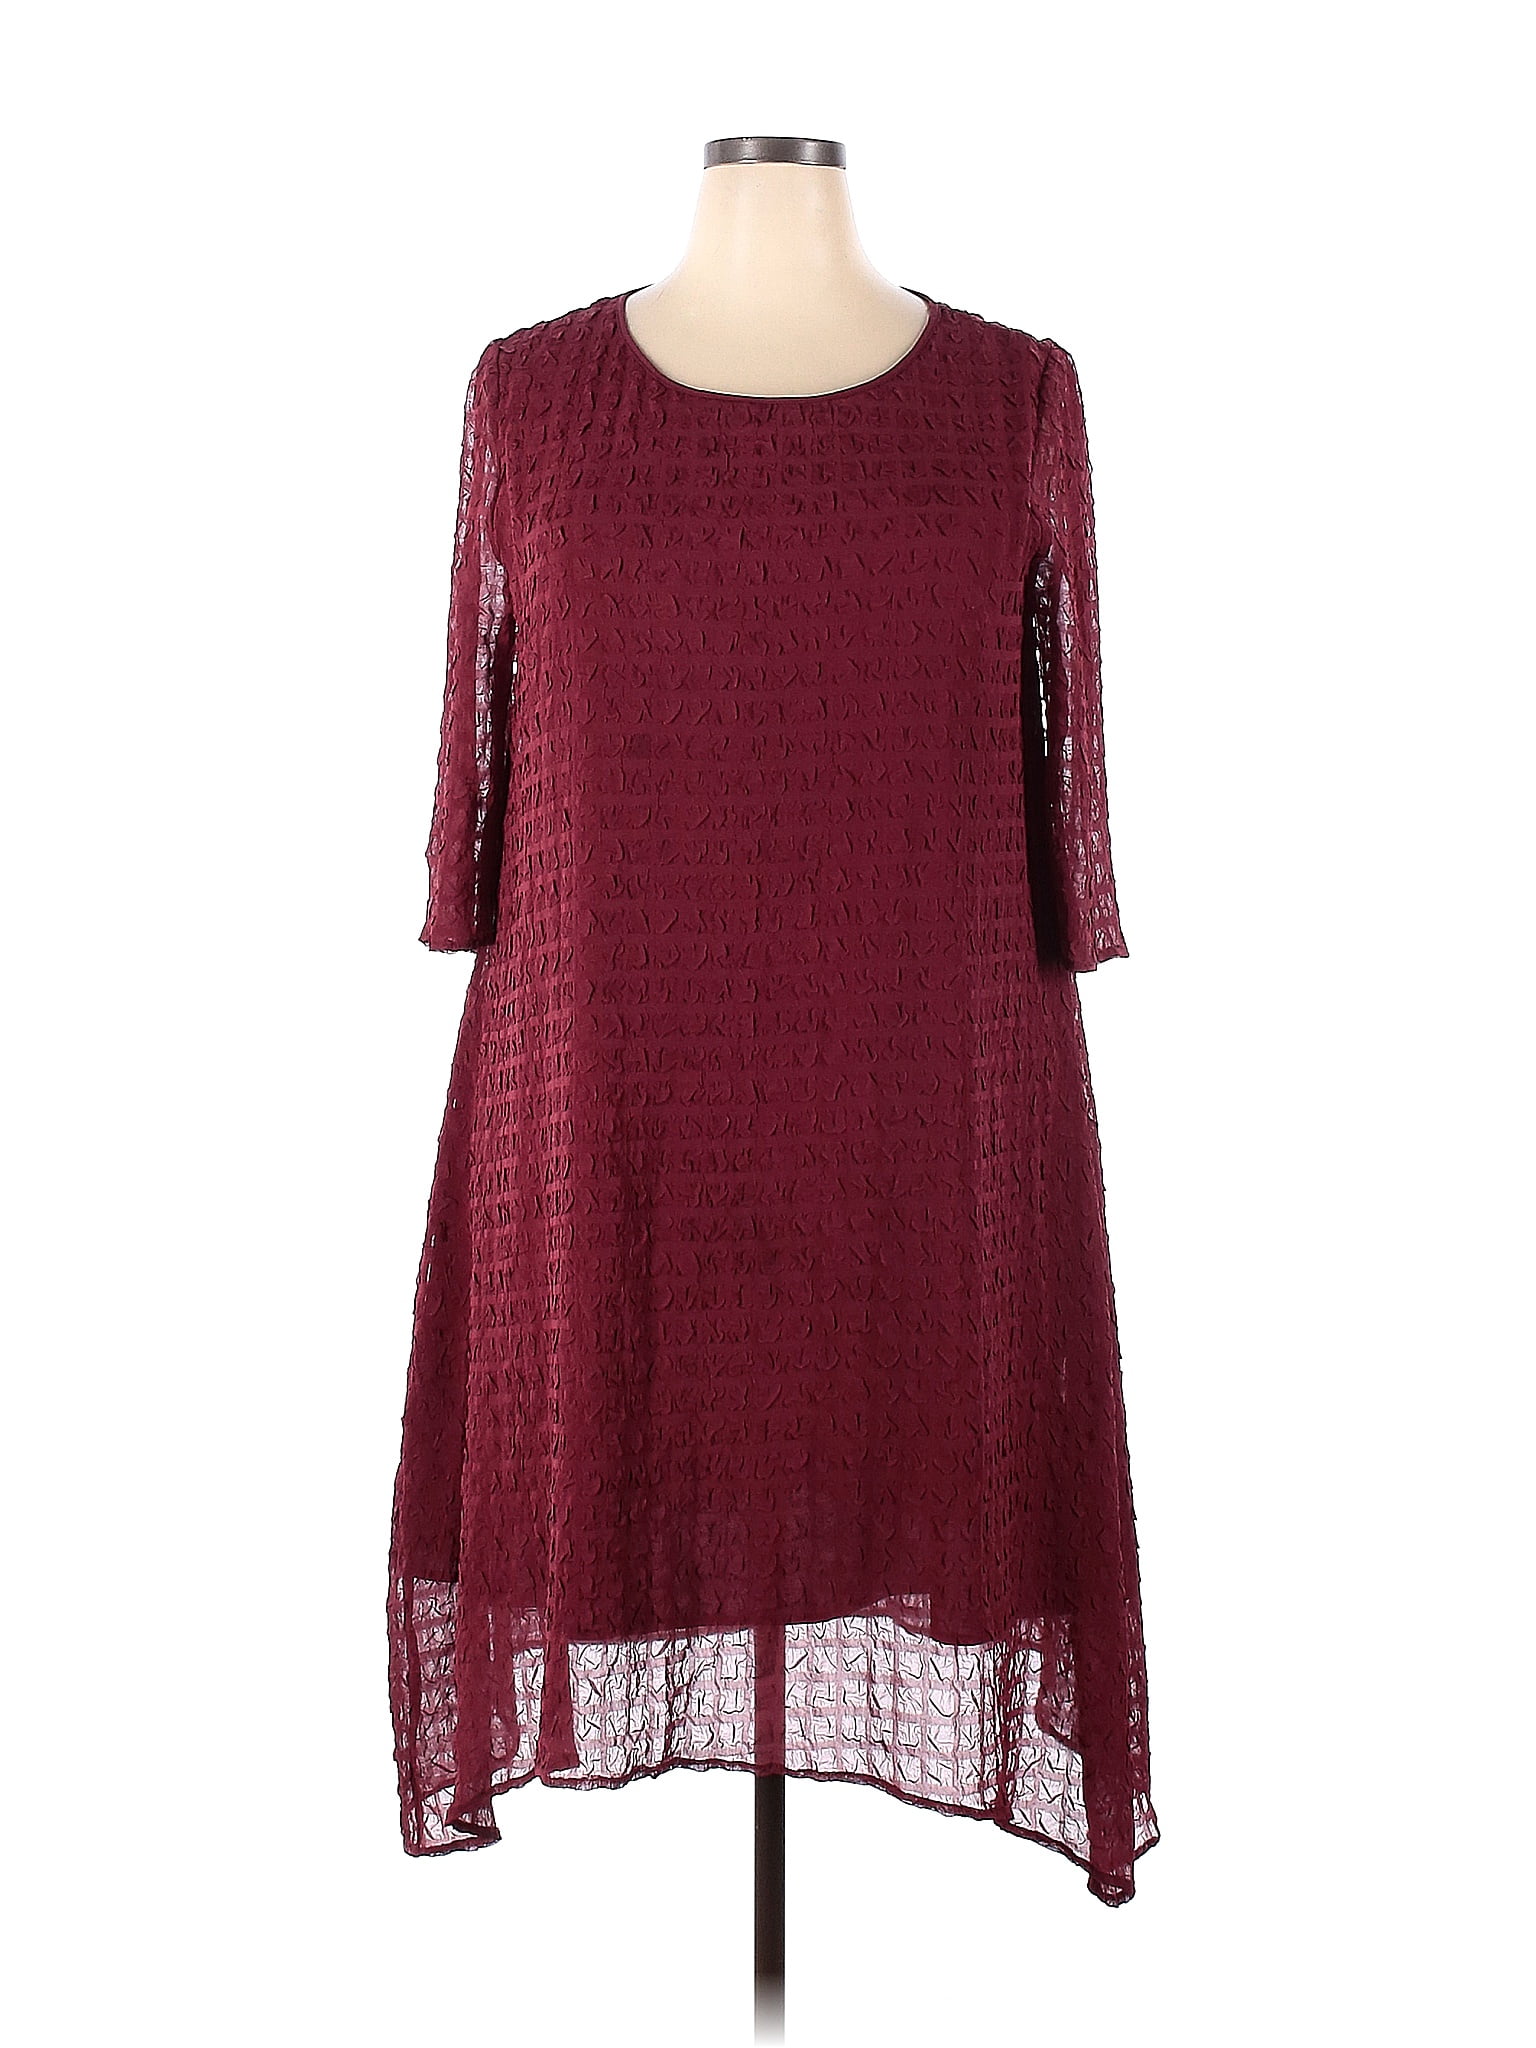 Assorted Brands Solid Maroon Burgundy Casual Dress Size 2X (Plus) - 60% ...